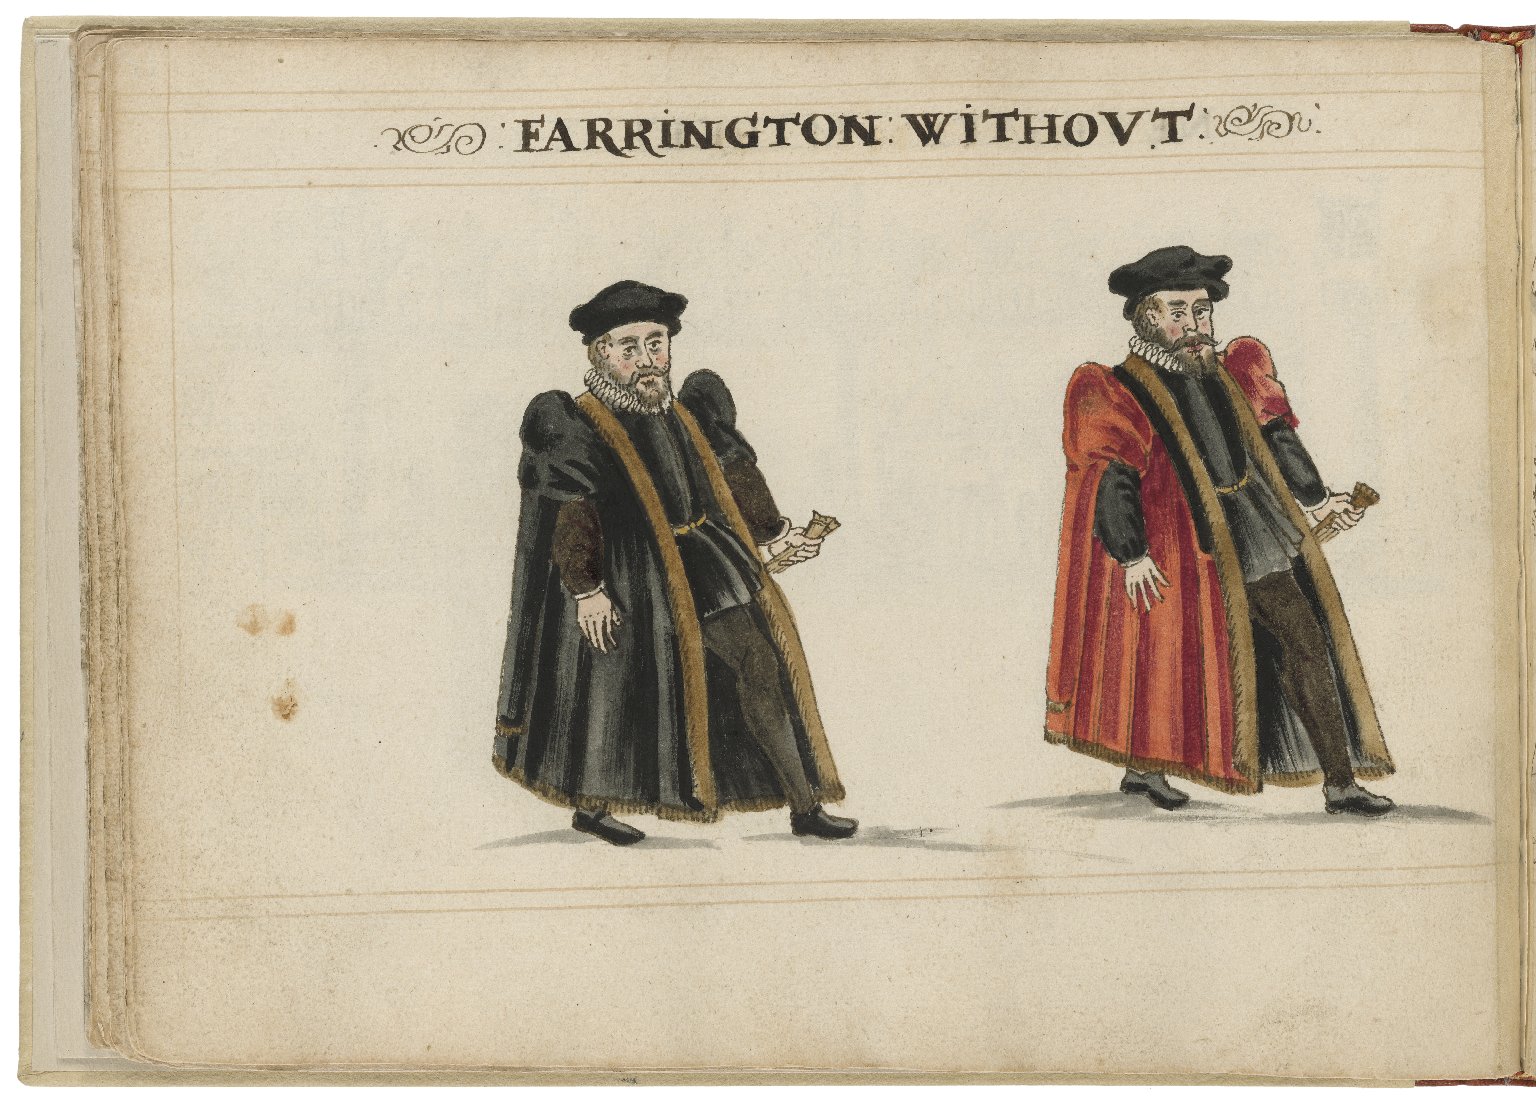 Watercolour painting of the alderman and deputy in charge of Farringdon Without Ward by Hugh Alley. Image courtesy of the Folger Digital Image Collection.